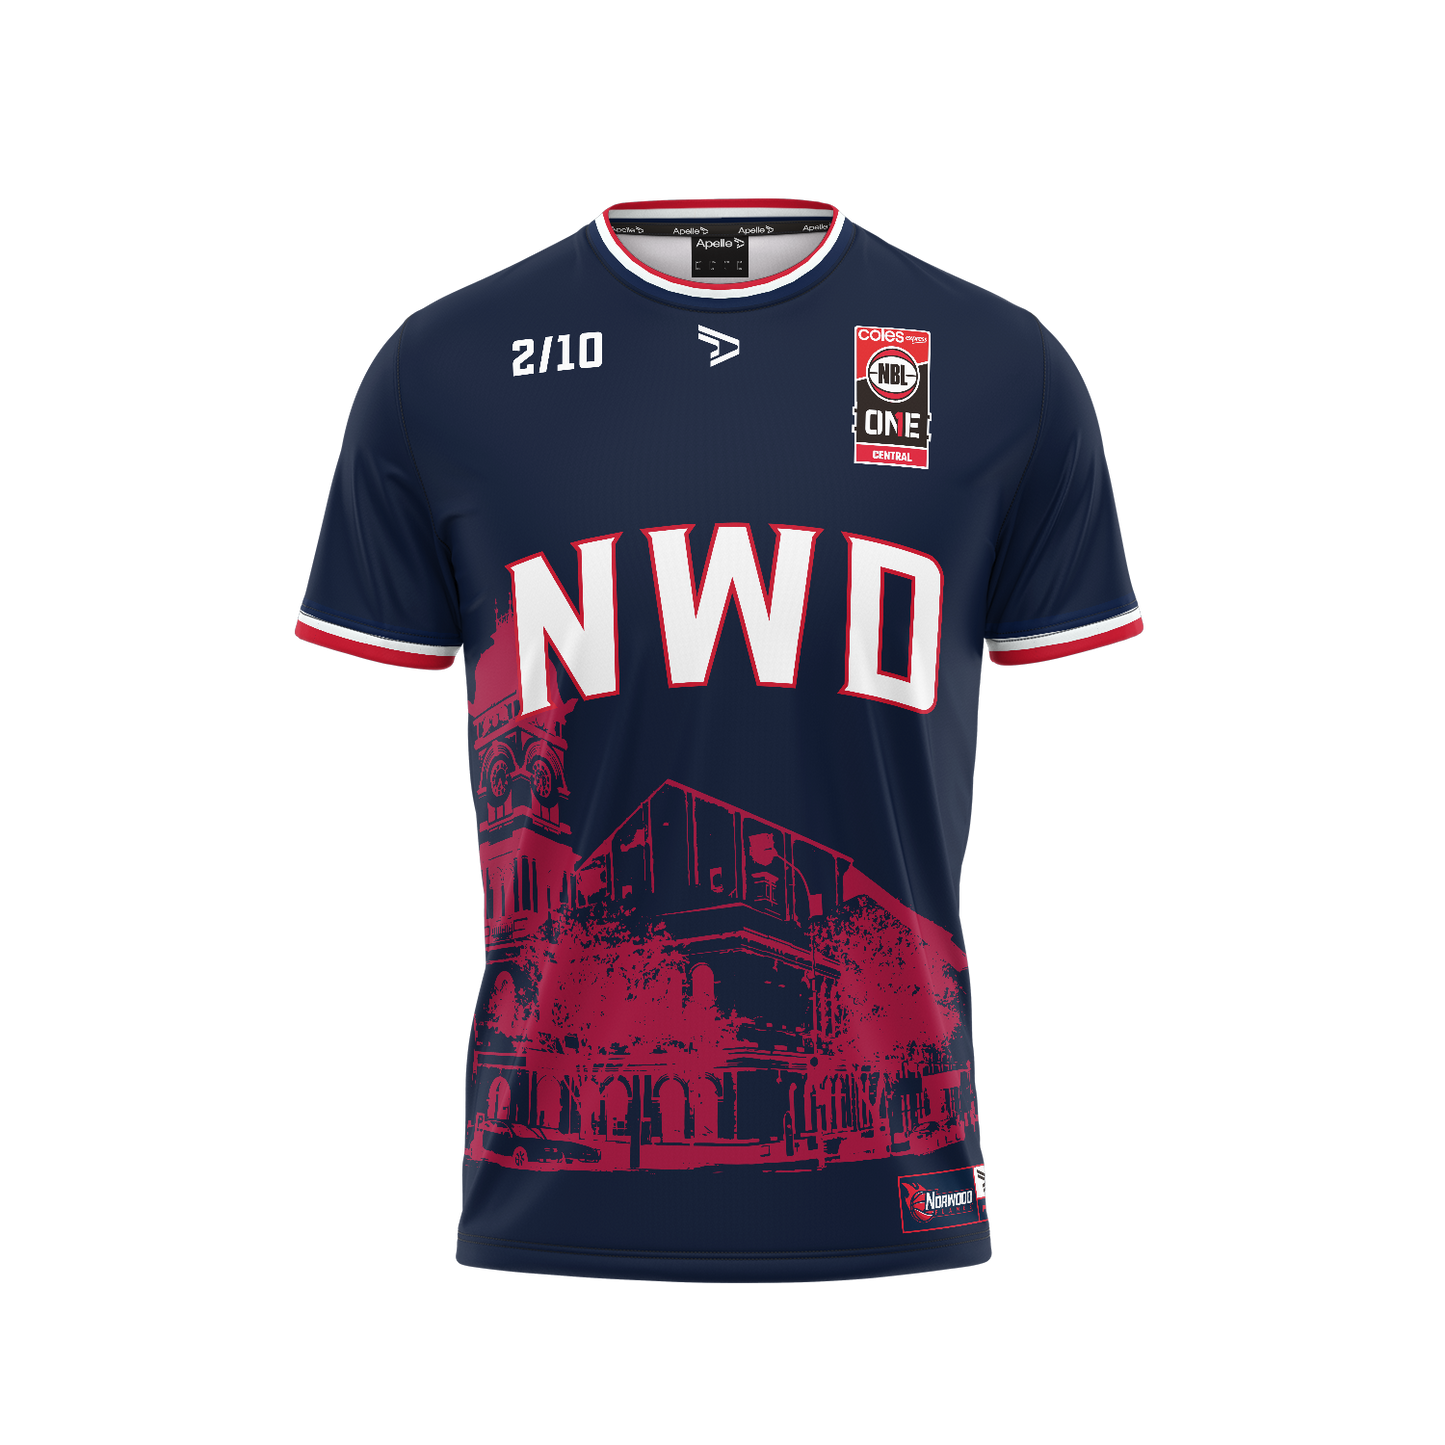 NORWOOD FLAMES - SUPPORTER JERSEY NAVY (NO NUMBER)